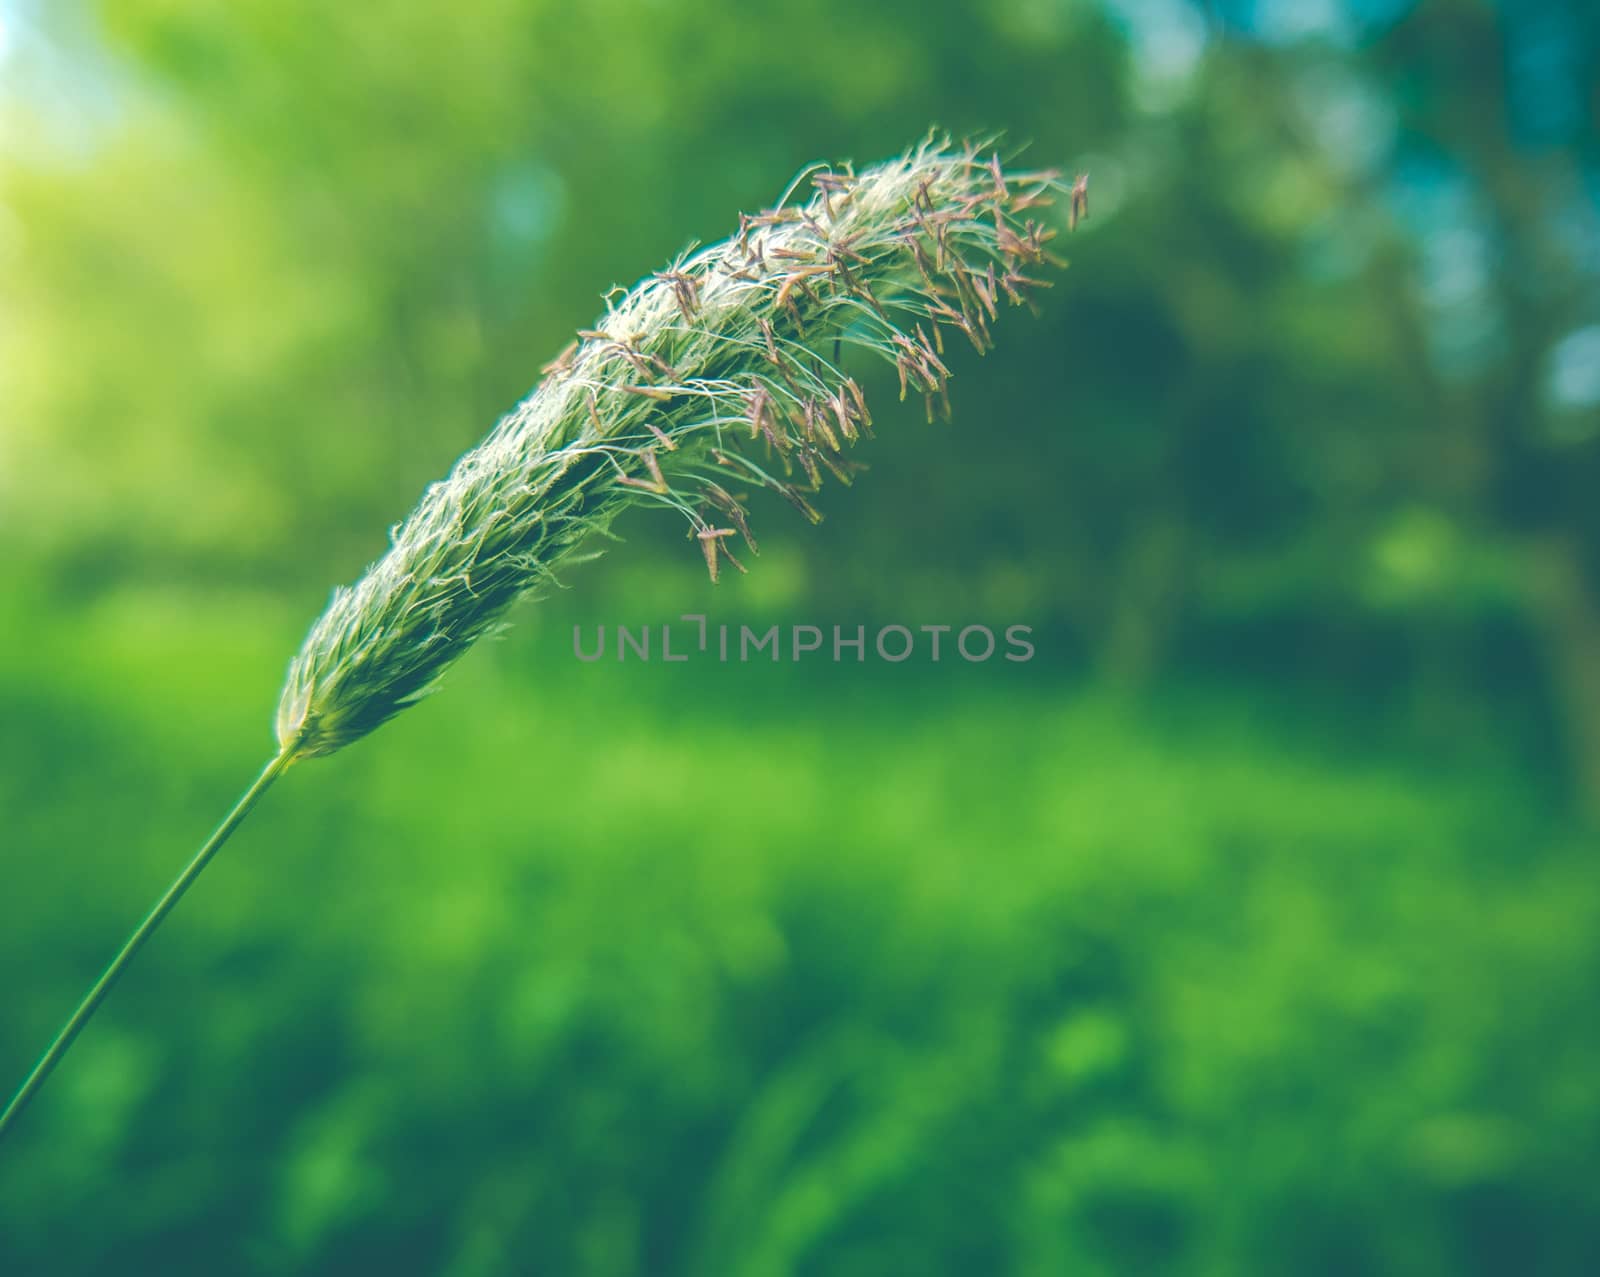 Seasonal Image Of A Closeup Of Some Summer Grass With Seeds